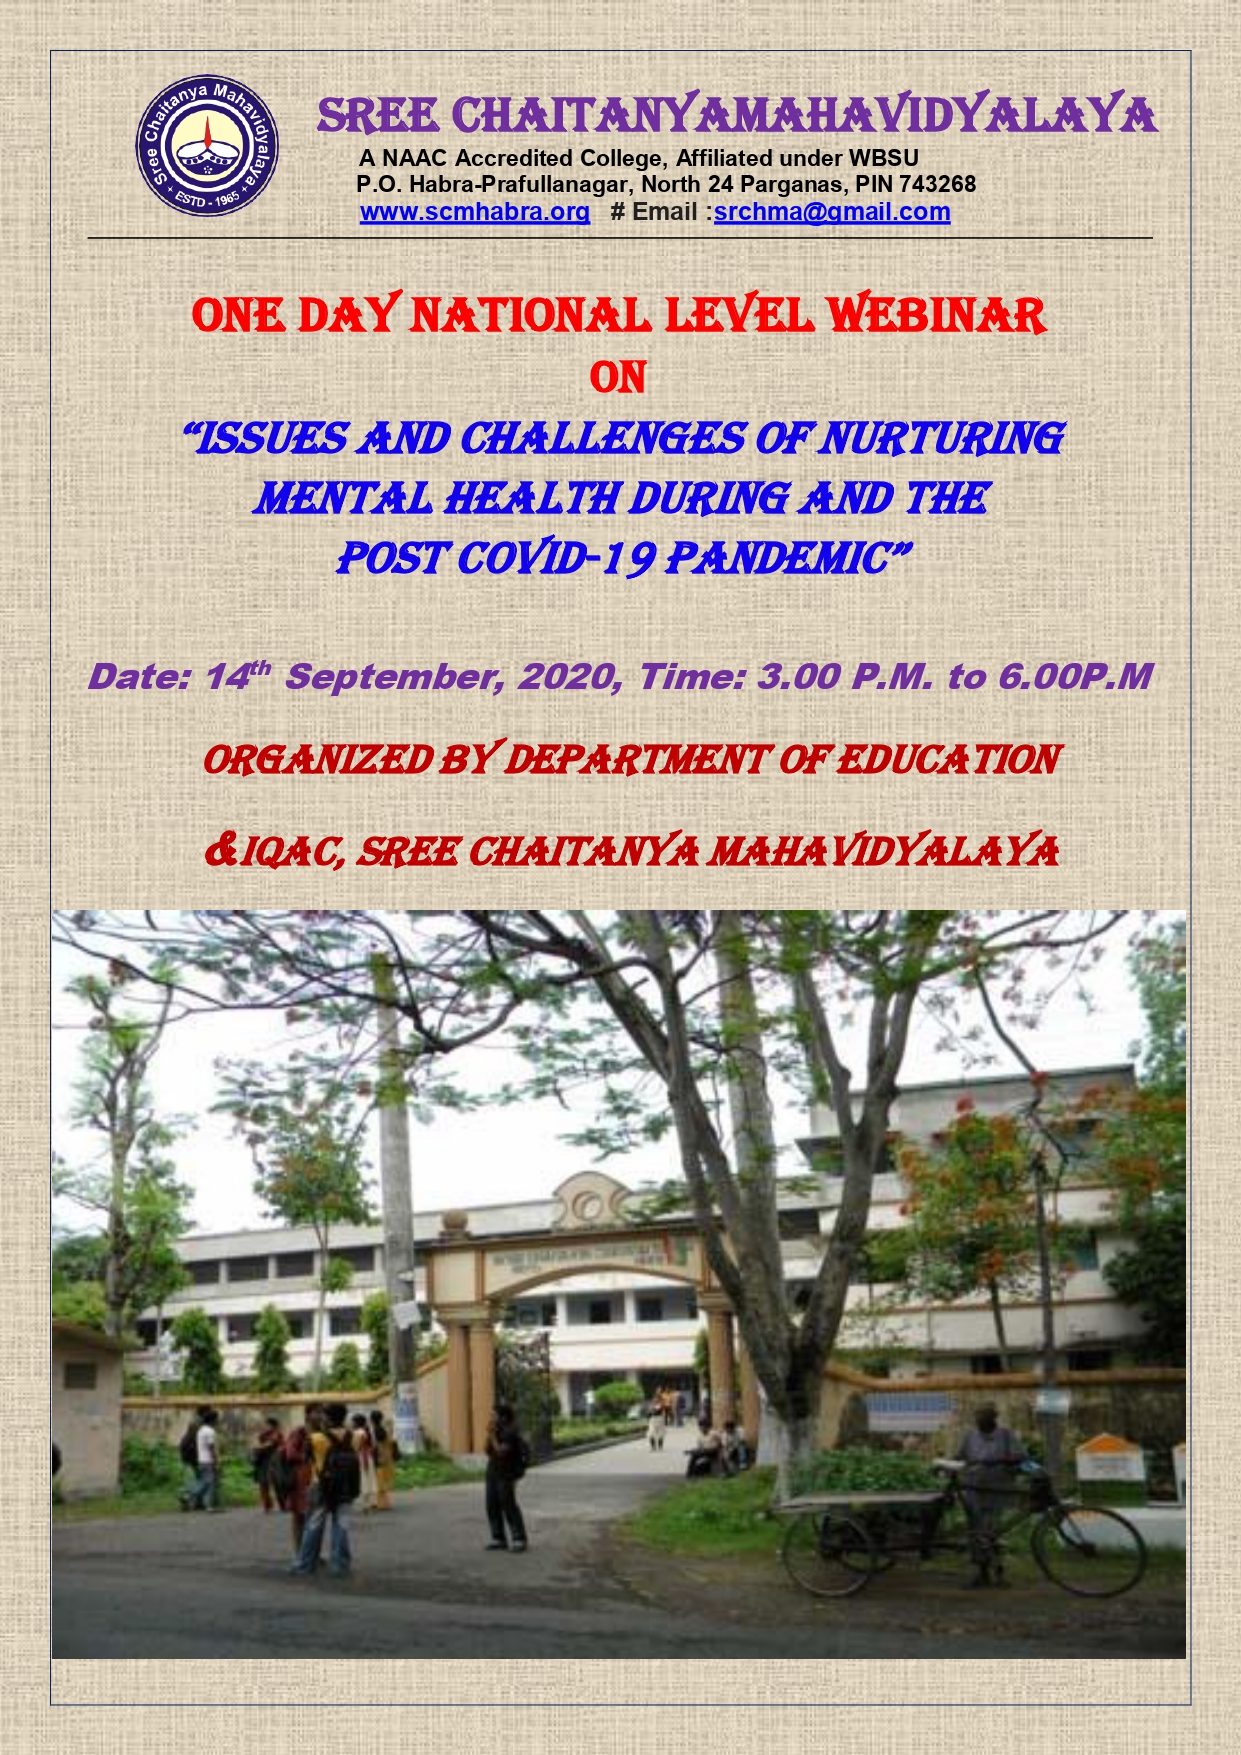 One Day National Level Webinar, Organized By Department of Education, 14-09-2020